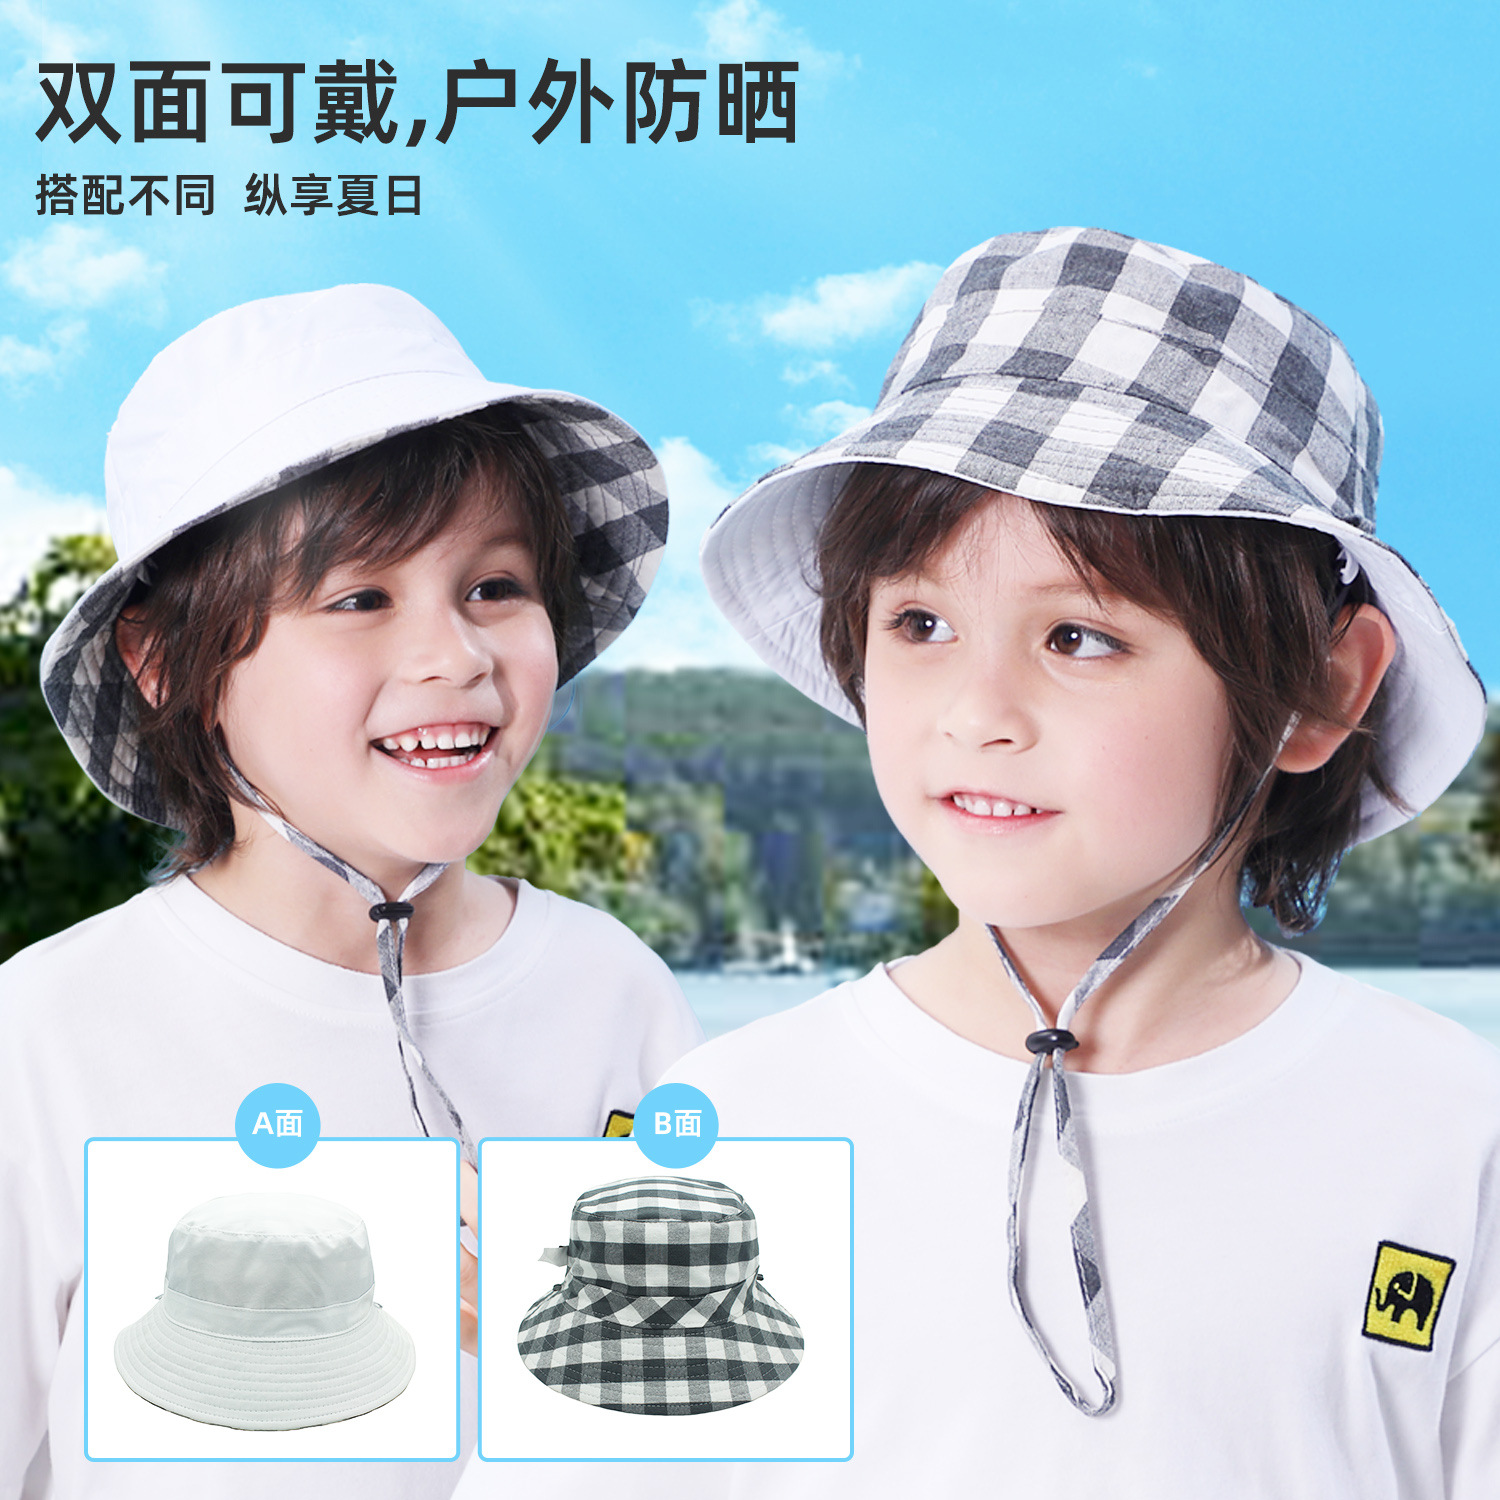 cotton double-sided wear parent-child bucket hat spring and summer sun protection broad-brimmed hat plaid baby sun protection hat bay hat sun hat